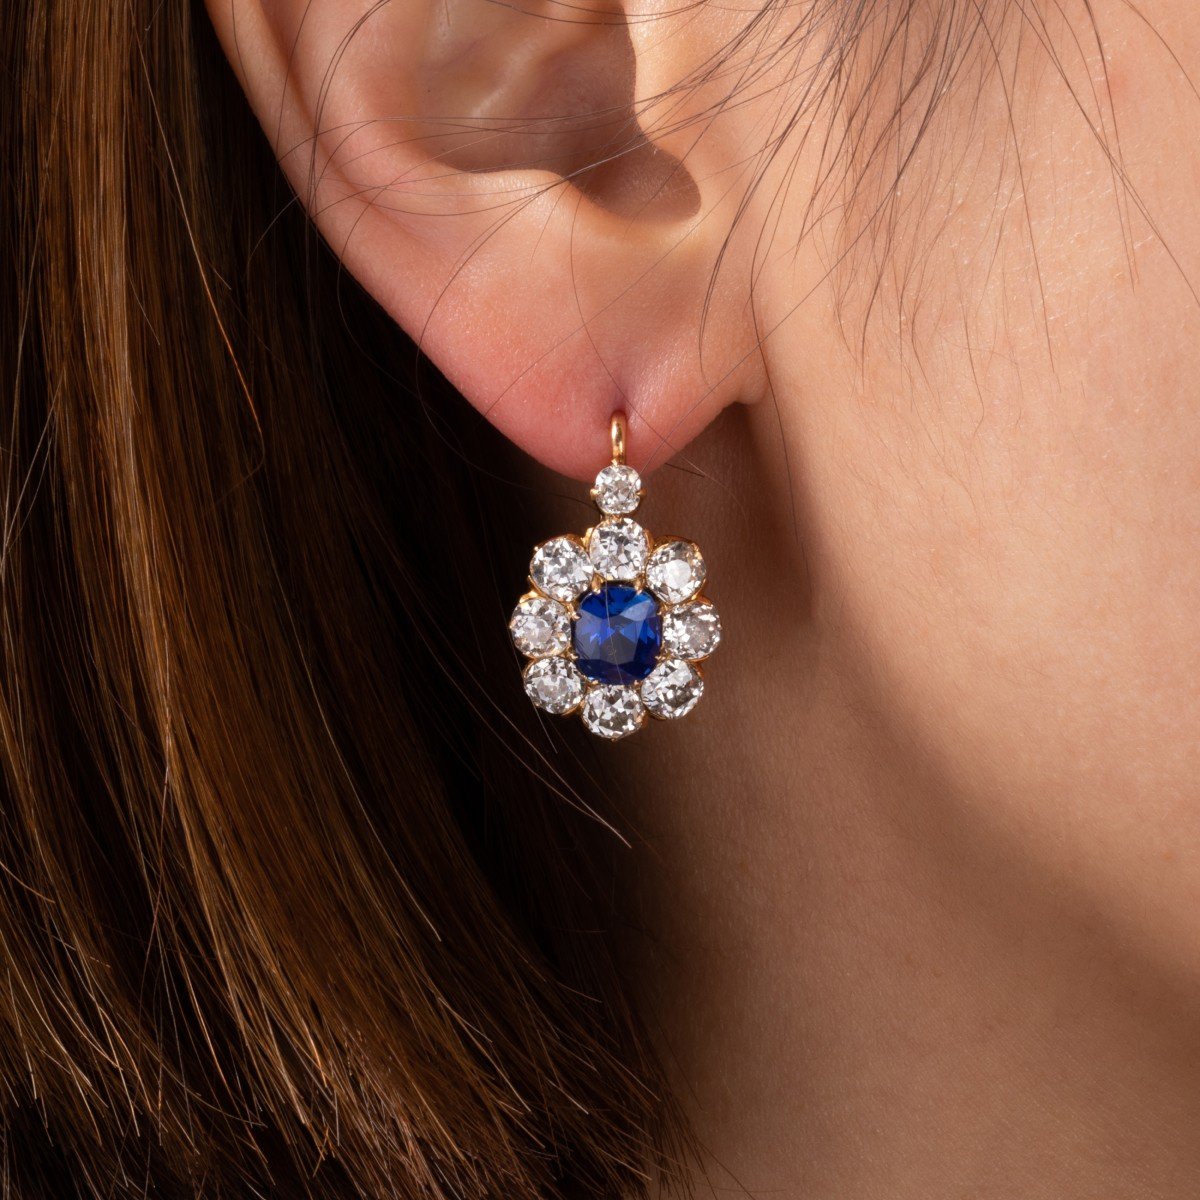 Antique Gold Diamond And Sapphire Earrings-photo-2